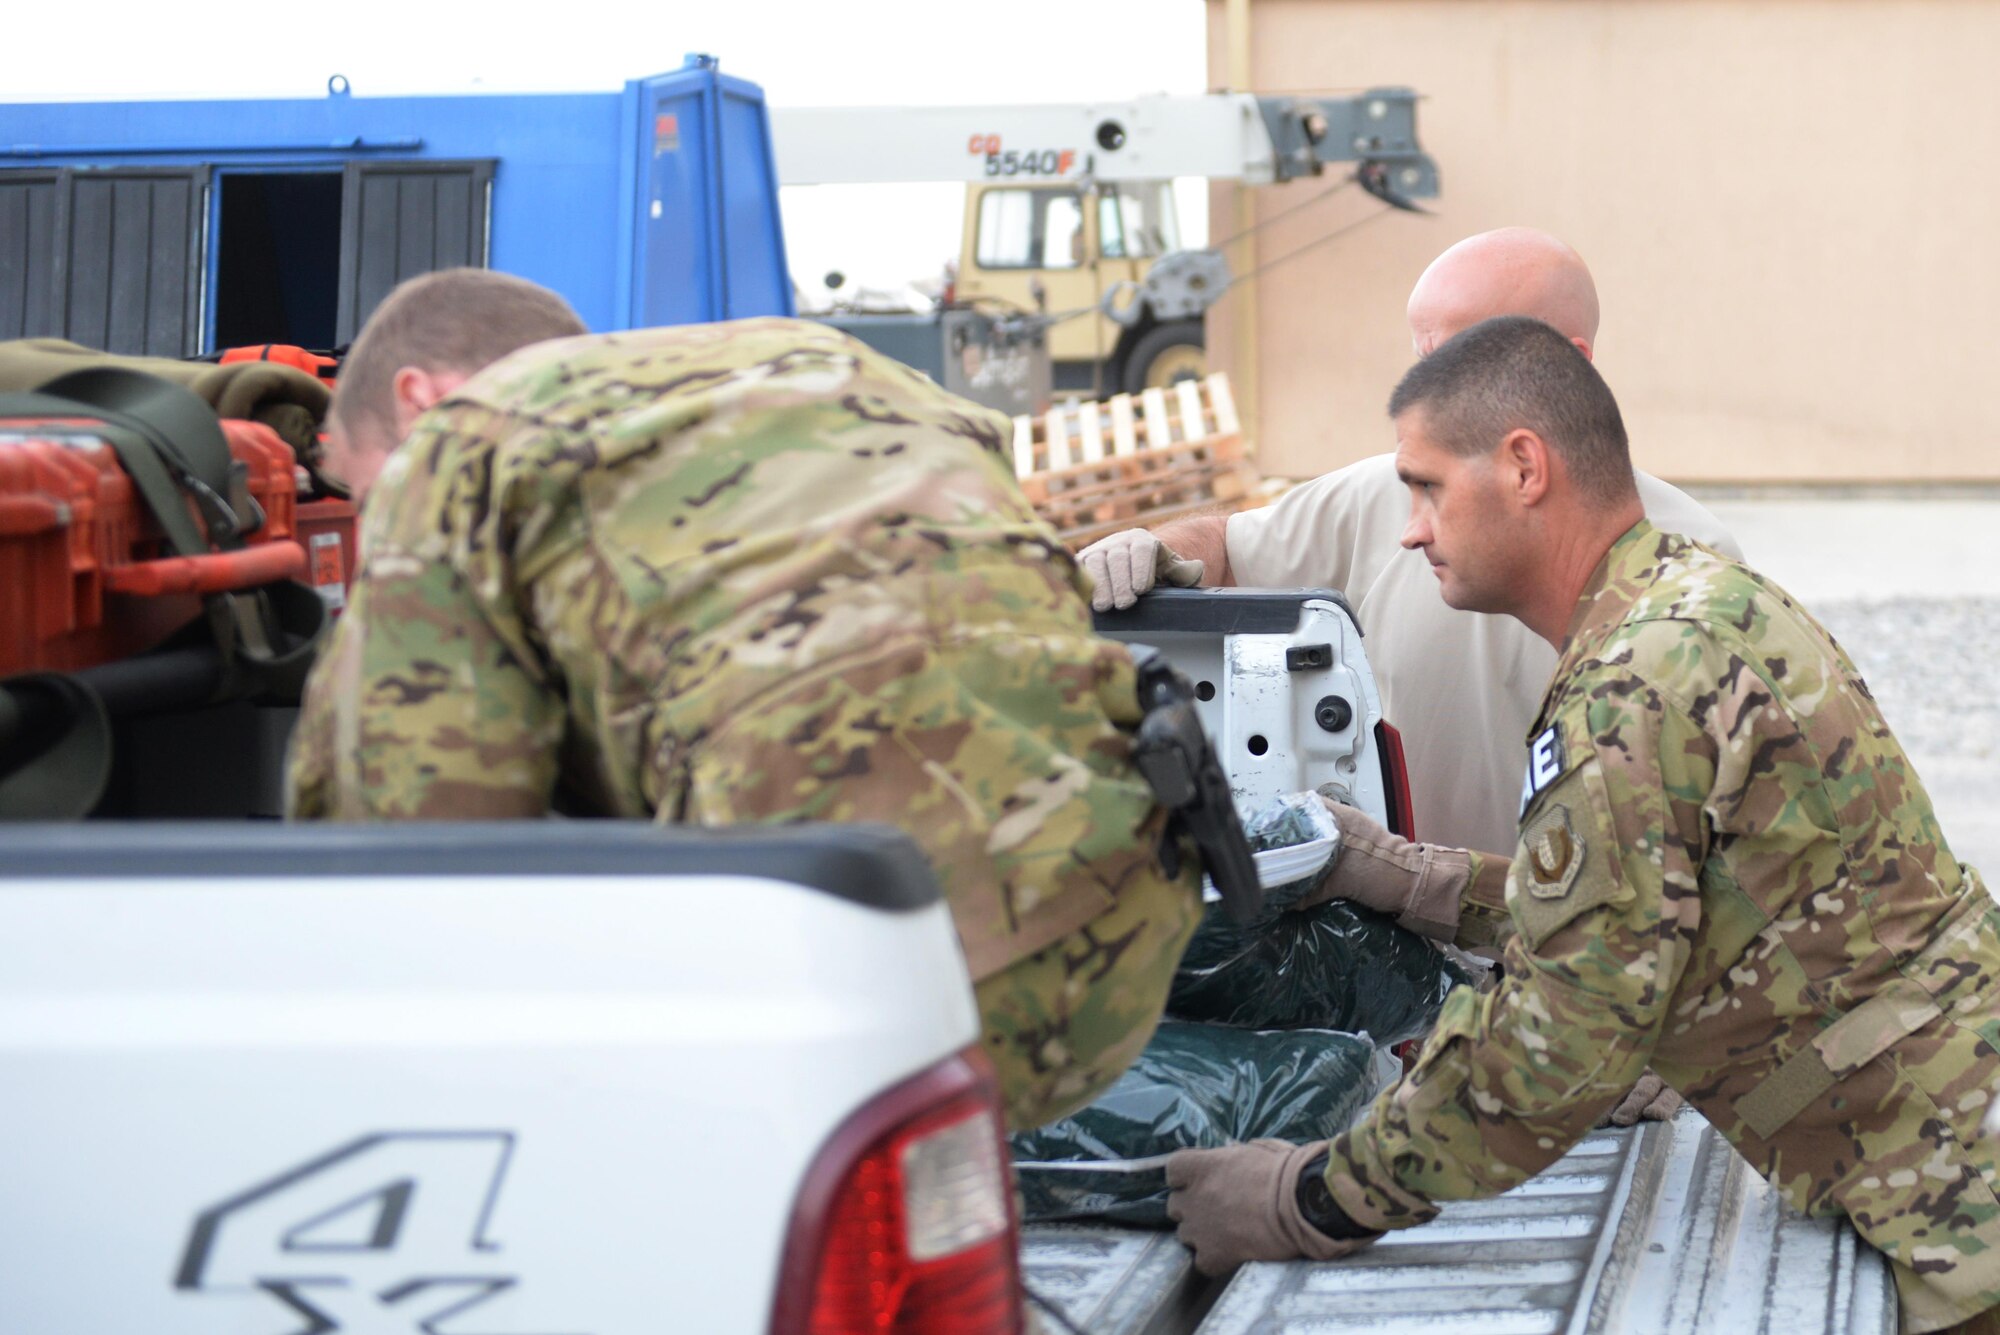 U.S. Air Force Tech. Sgt. Russell “Rusty” McLamb, right, 455th Expeditionary Aeromedical Evacuation Squadron technician deployed from the North Carolina Air National Guard’s 156th Aeromedical Evacuation Squadron, load equipment to take to a -17 Globemaster III aircraft on the flight line at Bagram Airfield, Afghanistan, Aug. 8, 2015. McLamb is part of the 455th EAES, which is responsible for evacuating the sick and wounded from Central Command to higher echelons of medical care. (U.S. Air Force photo by Maj. Tony Wickman/Released)